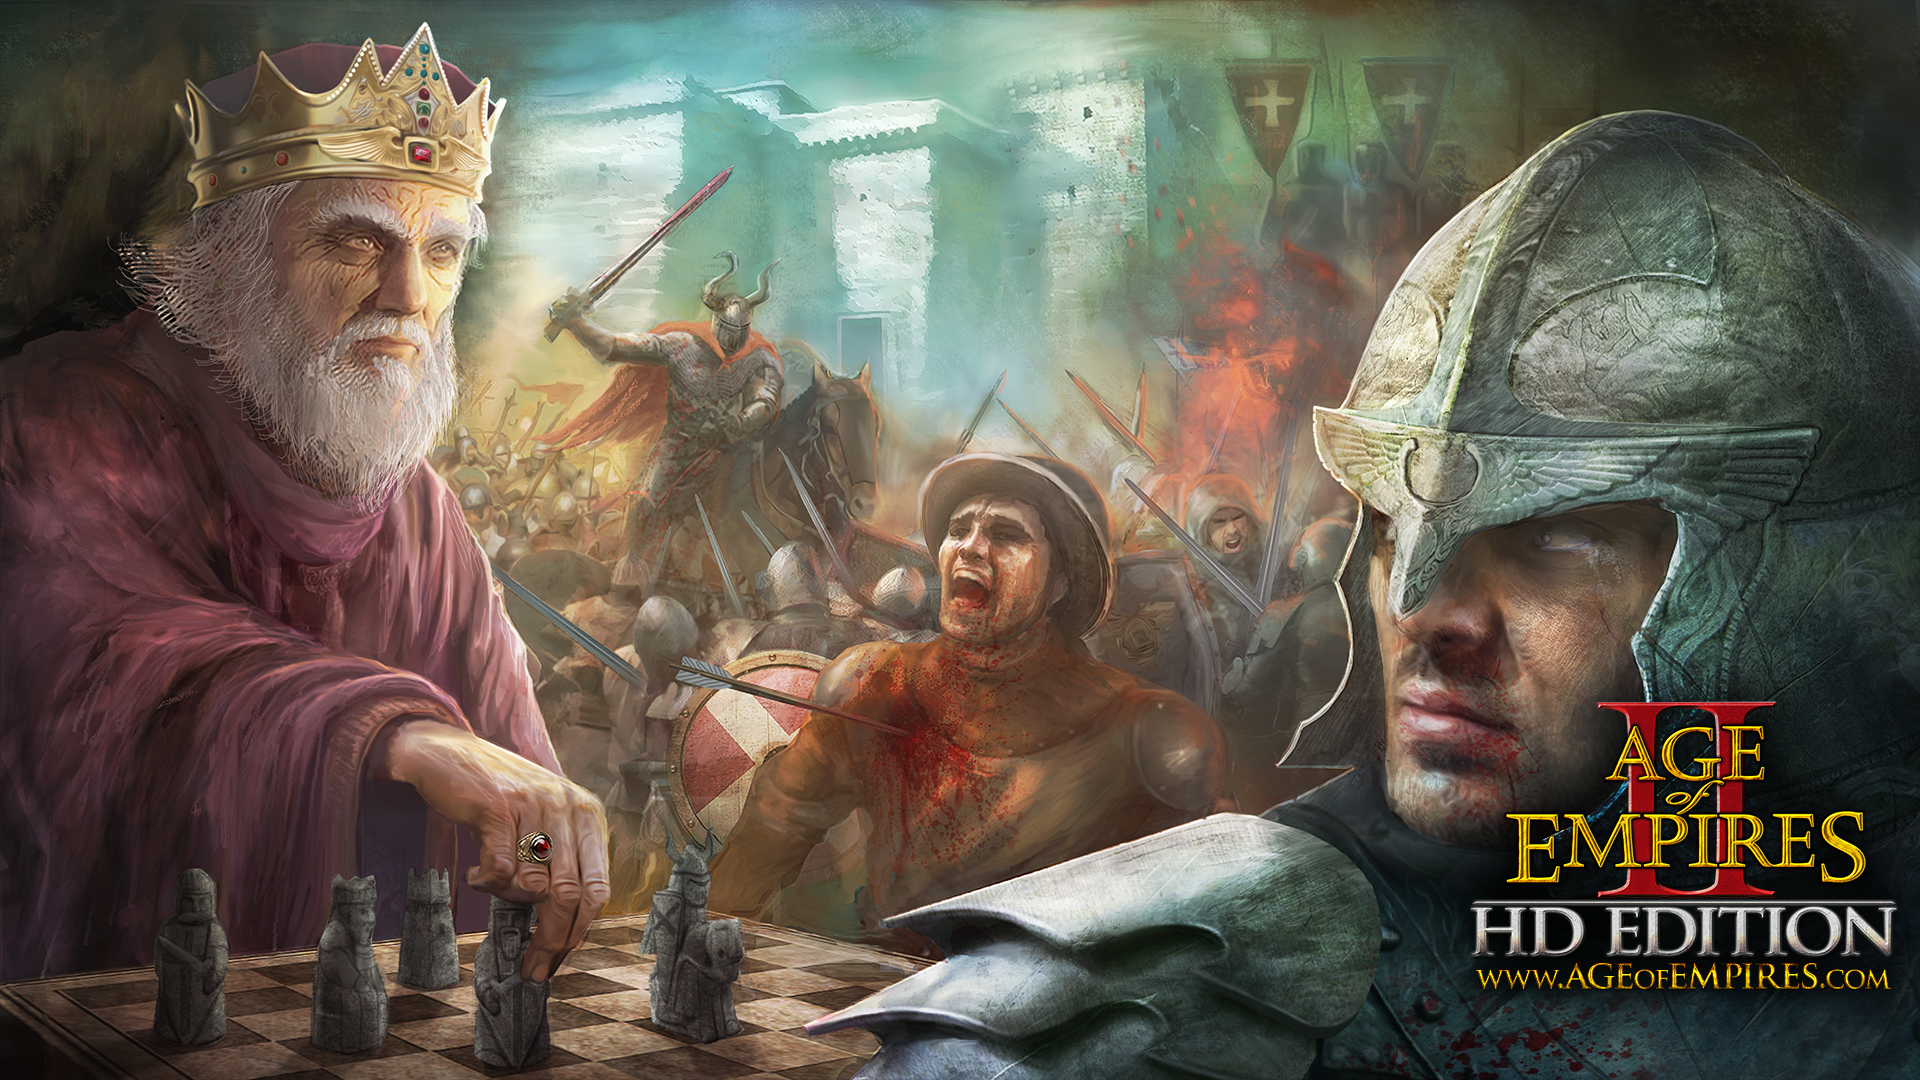 Video Game Age of Empires II HD HD Wallpaper | Background Image